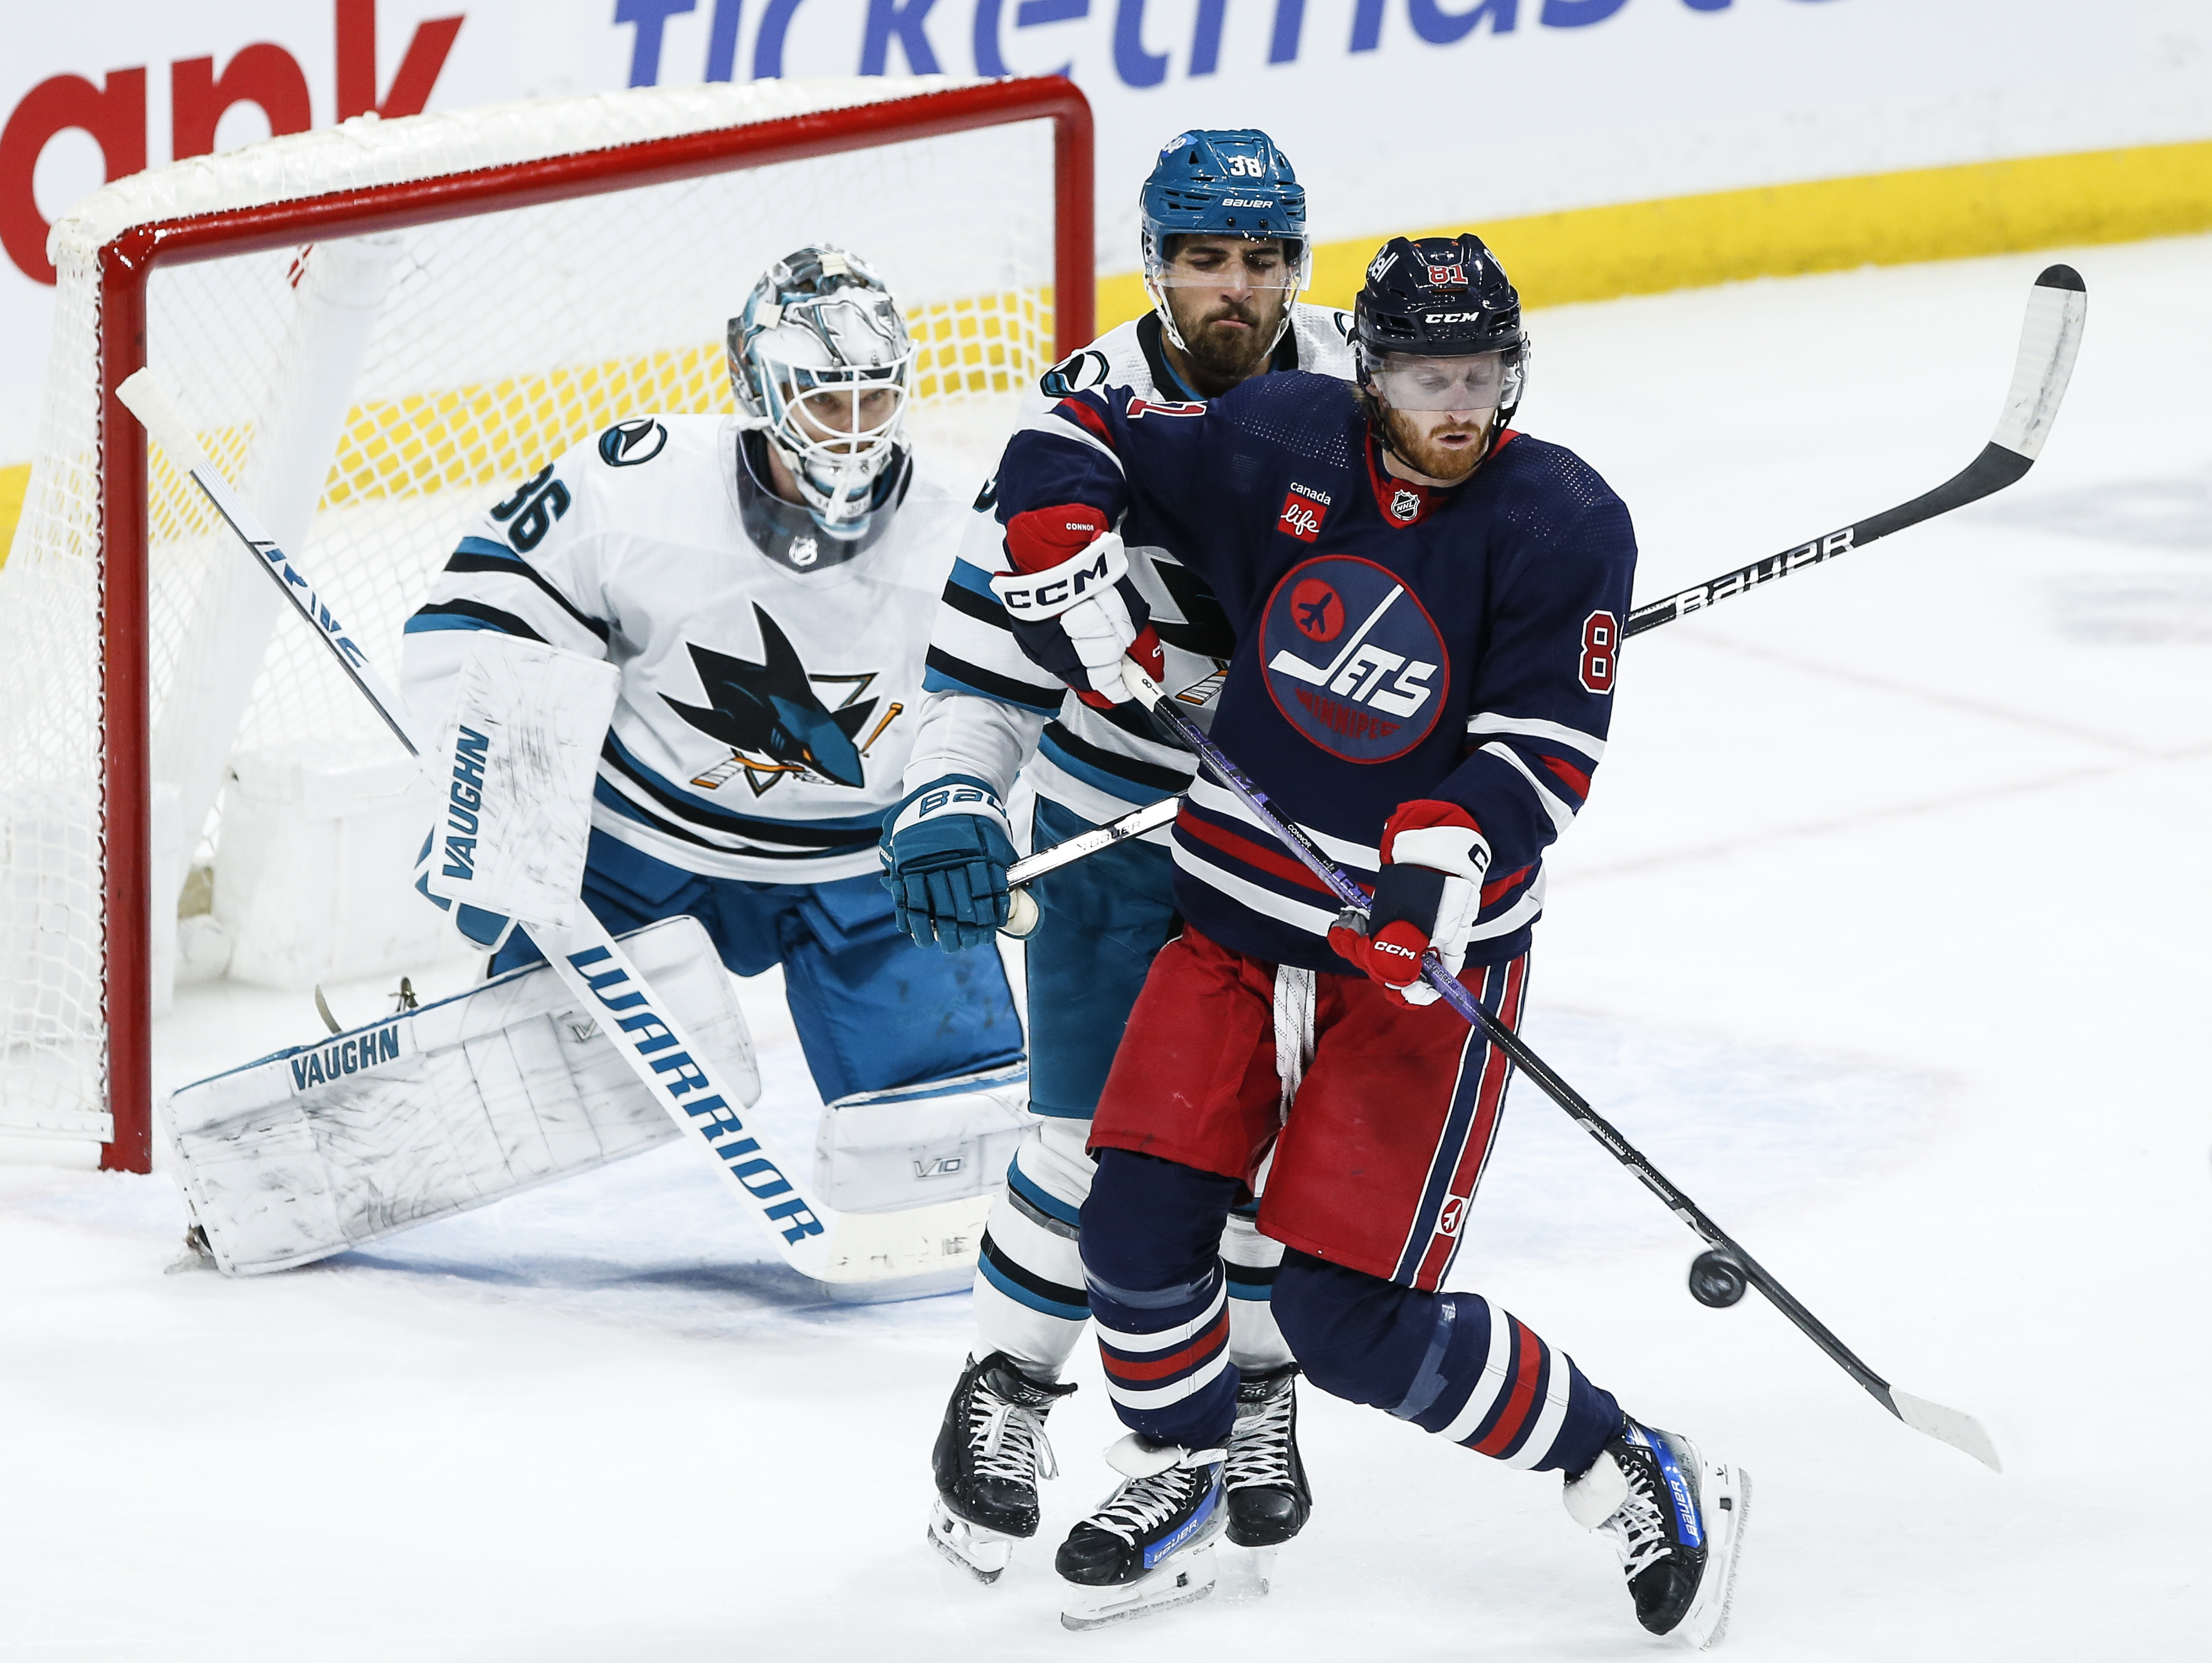 Hellebuyck records 35th career shutout as Jets beat Sharks 1-0